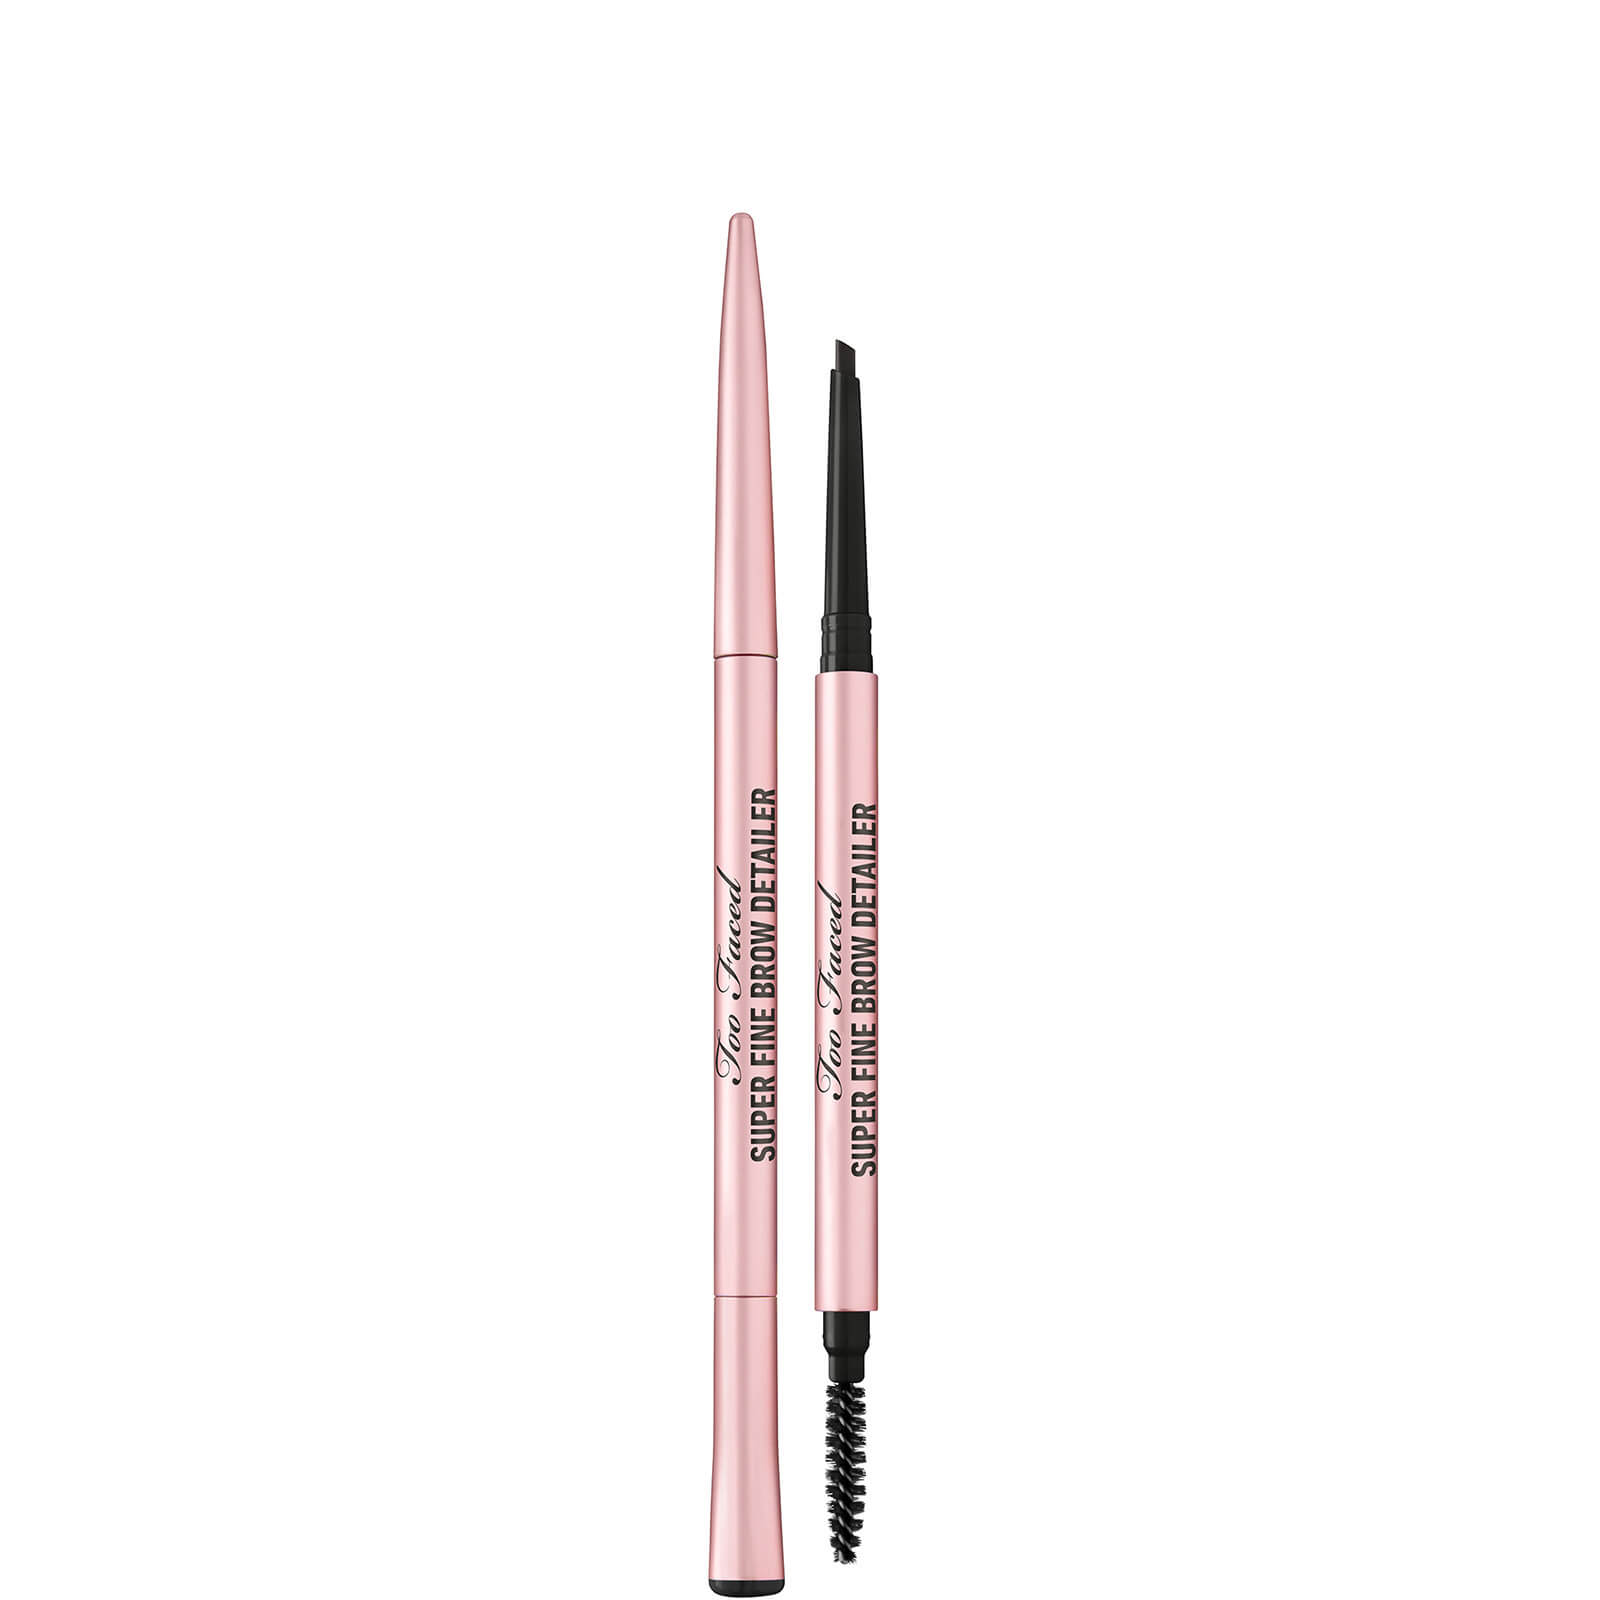 Image of Too Faced Superfine Brow Detailer Ultra Slim Brow Pencil 0.08g (Various Shades) - Soft Black